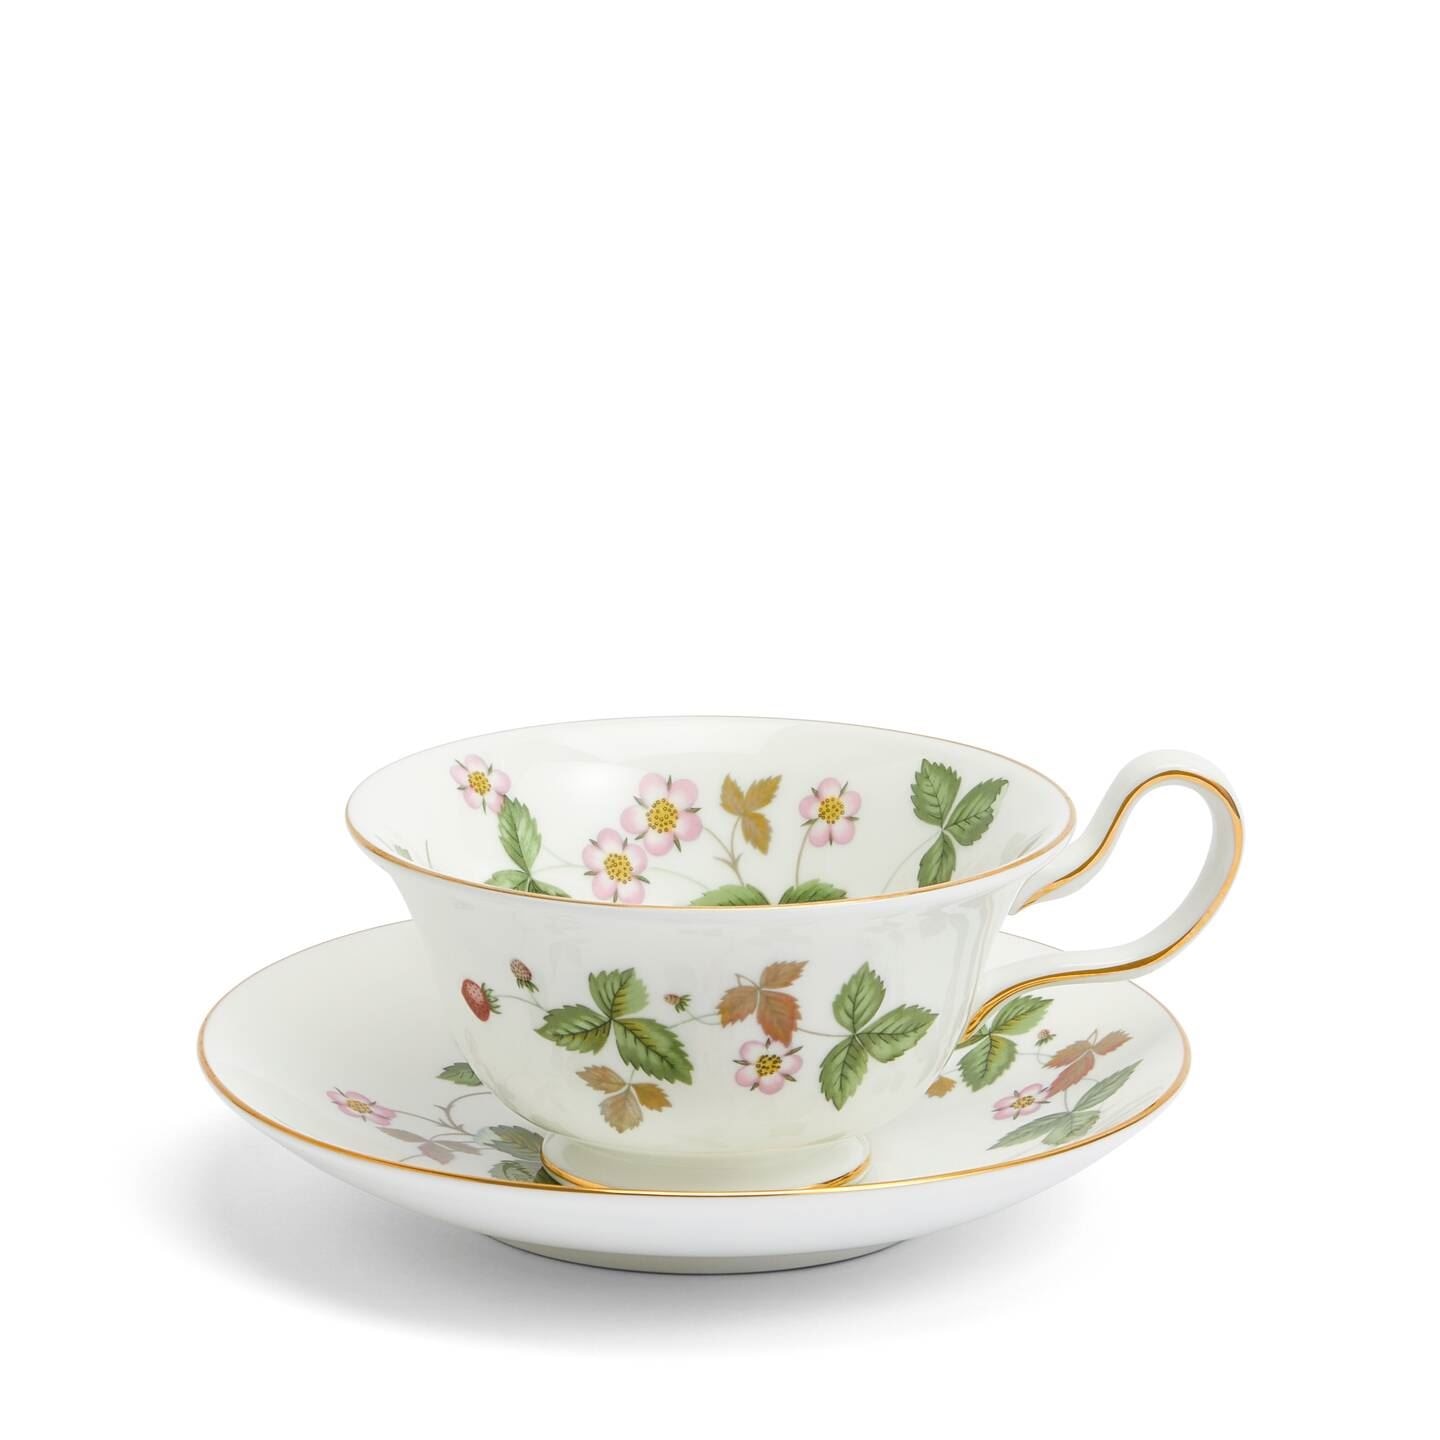 Wedgwood Wild Strawberry Teacup and Saucer